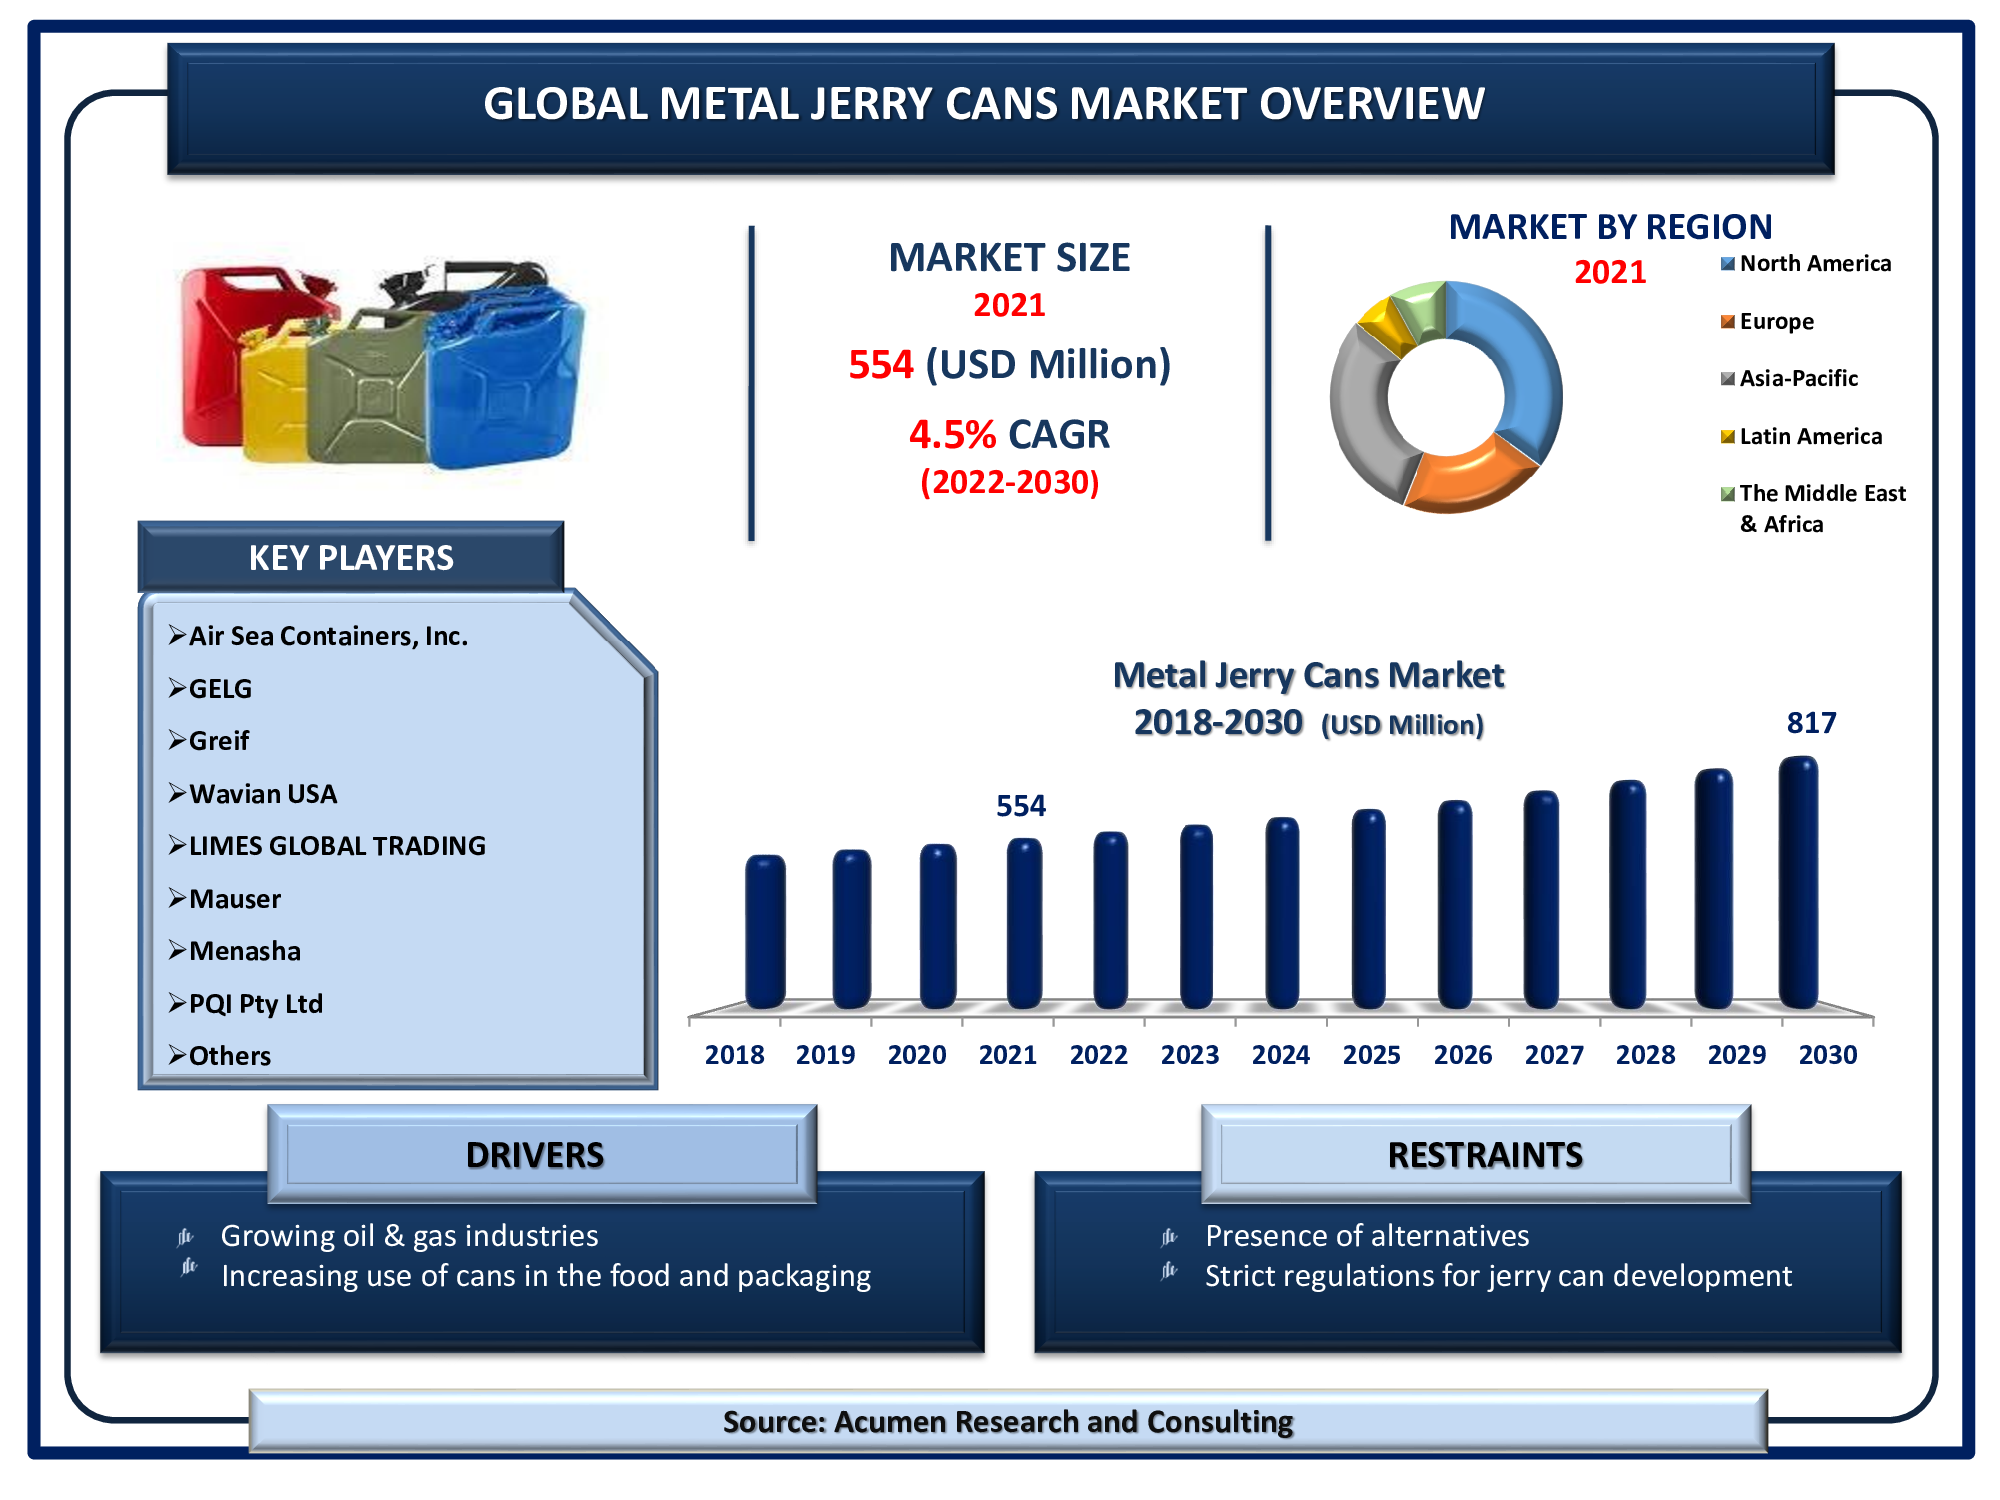 Metal Jerry Cans Market will achieve a market size of USD 817 Million by 2030, budding at a CAGR of 4.5%